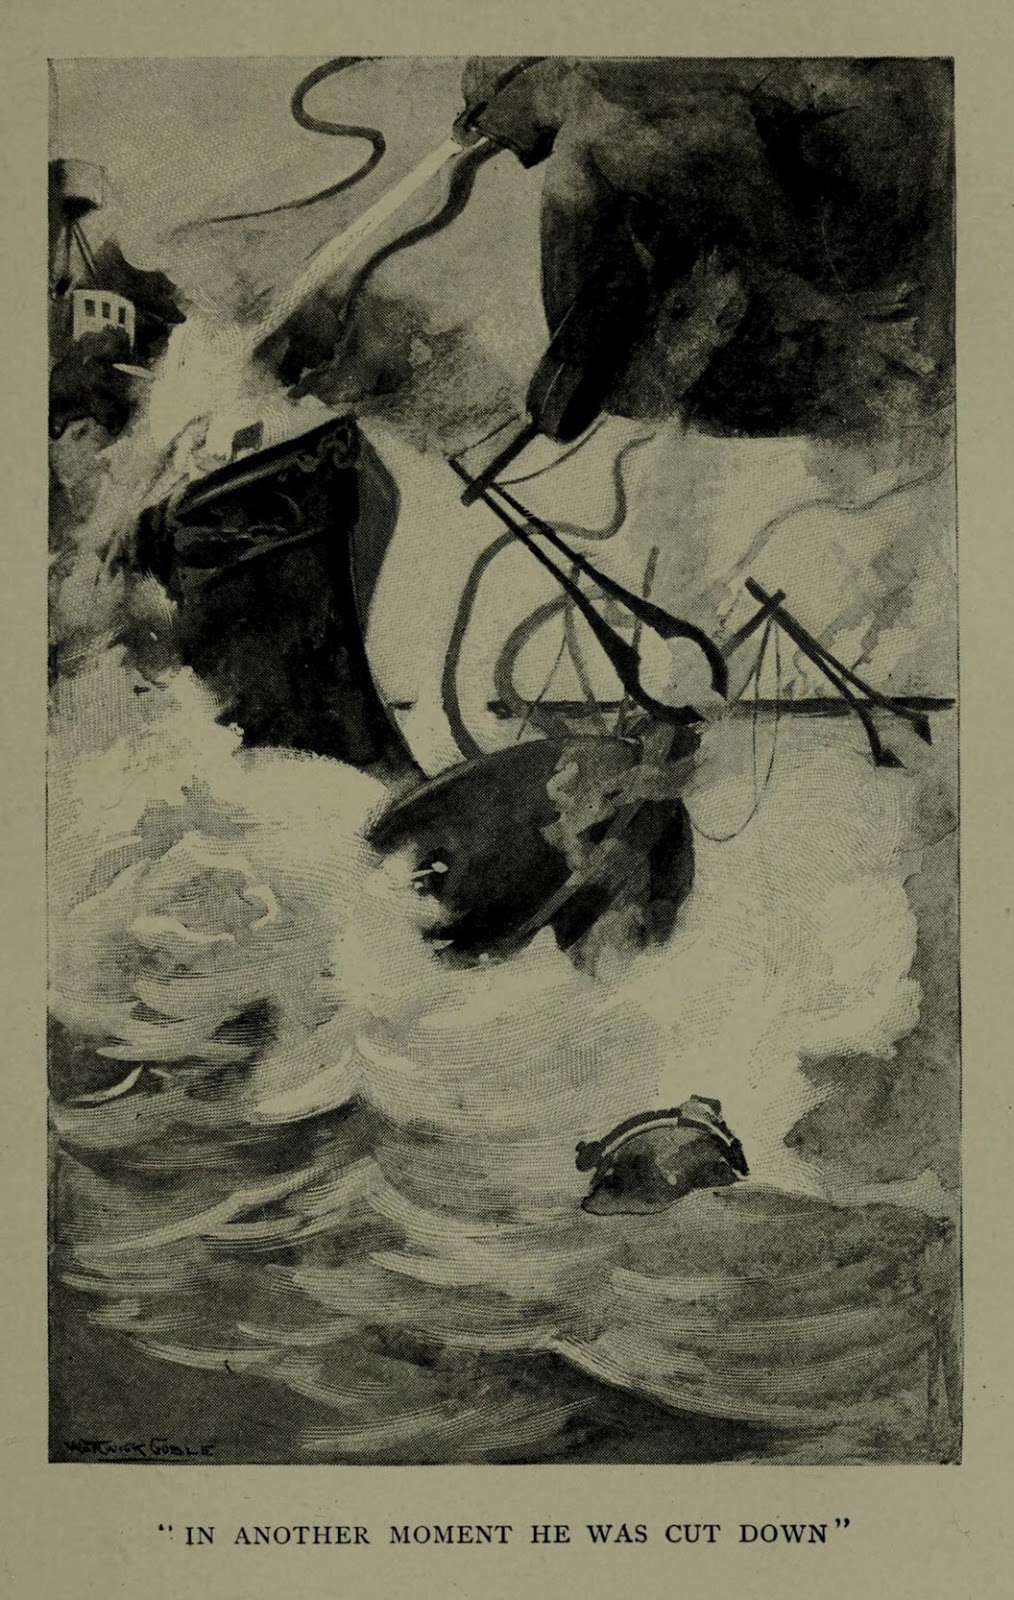 The World’s First Illustrations for H.G. Wells’ The War of the Worlds